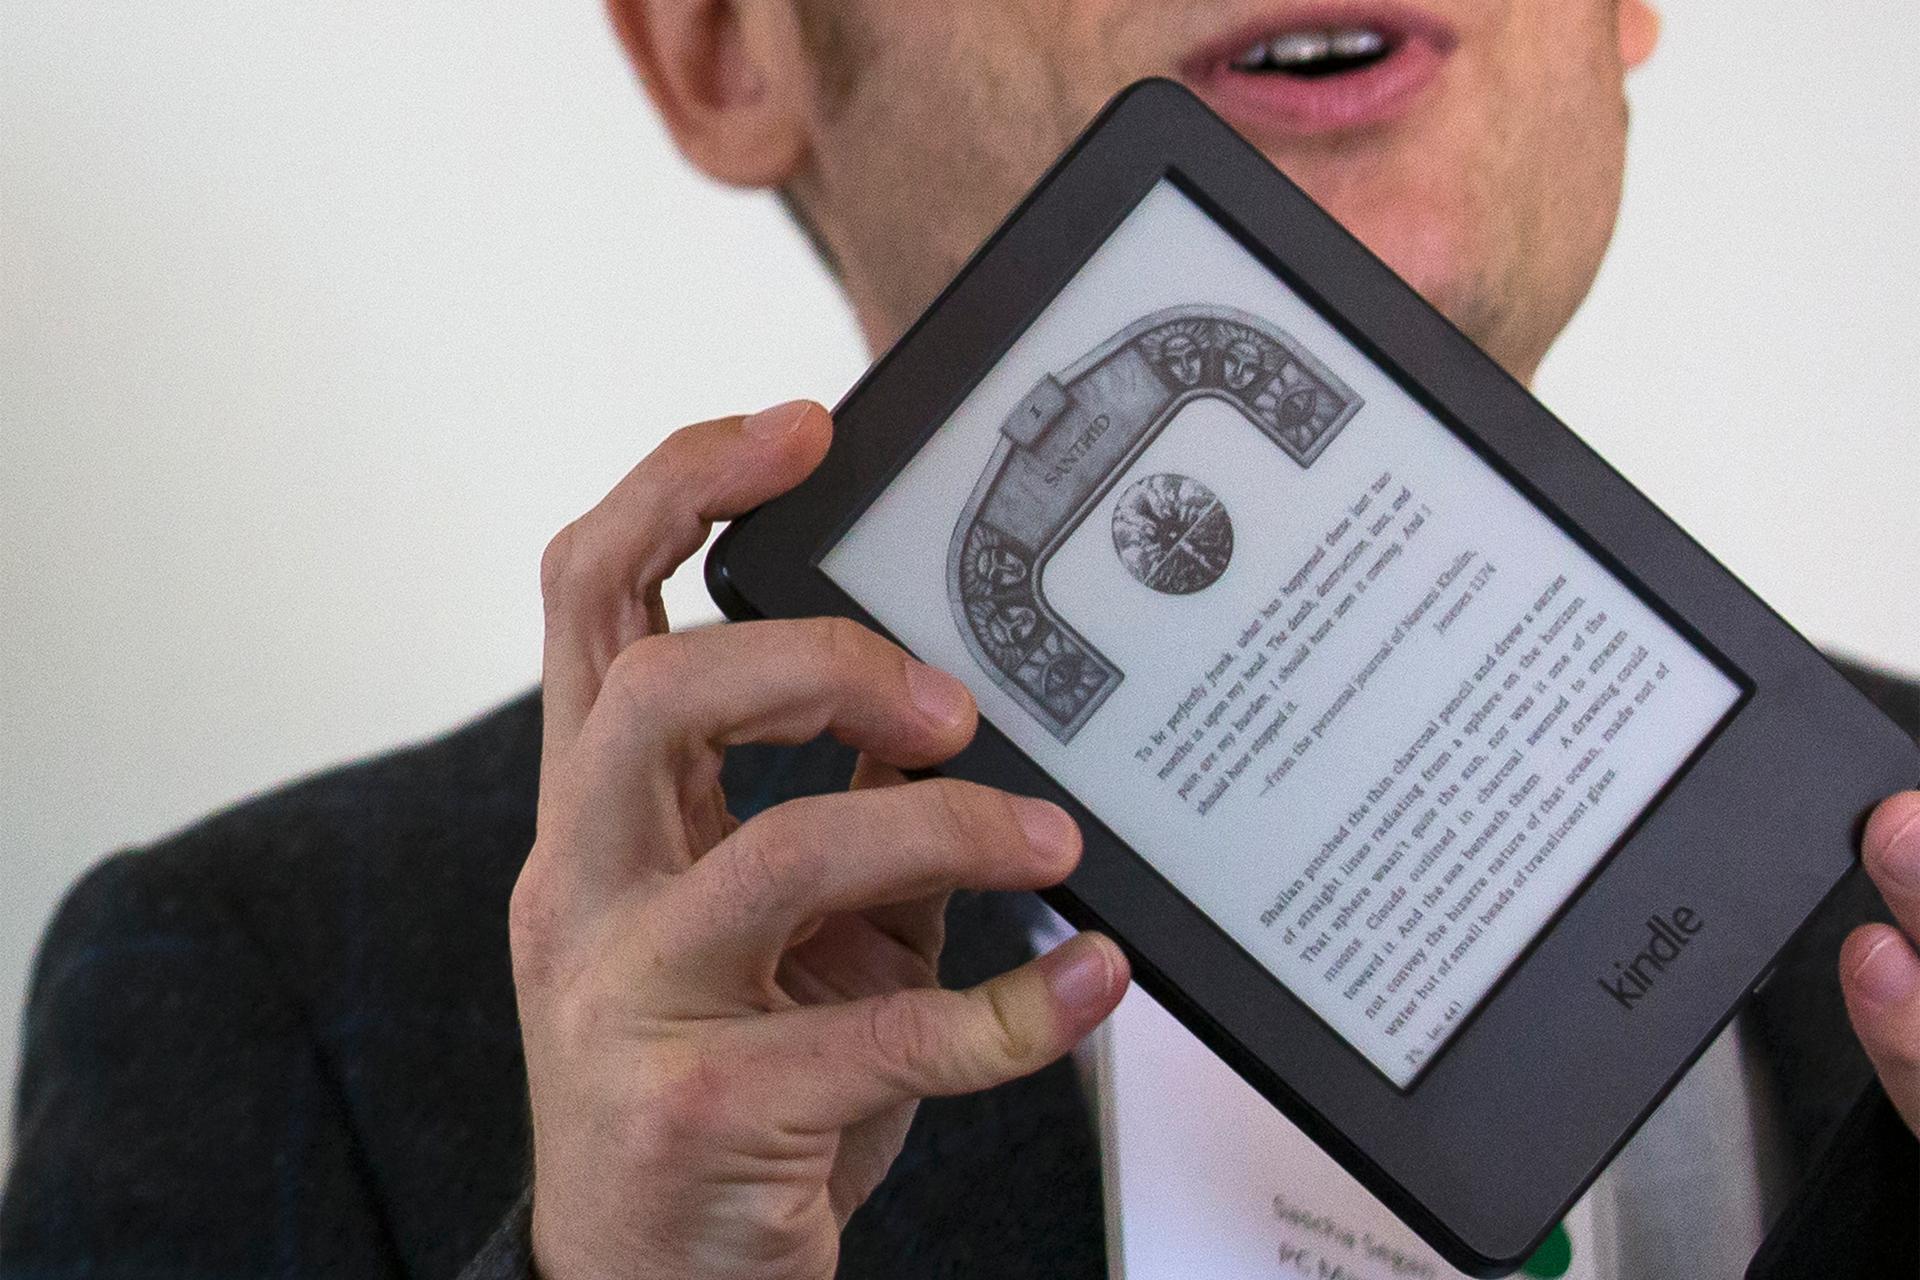 A journalist shows the new Kindle Voyage during a launch event in New York September 17, 2014.